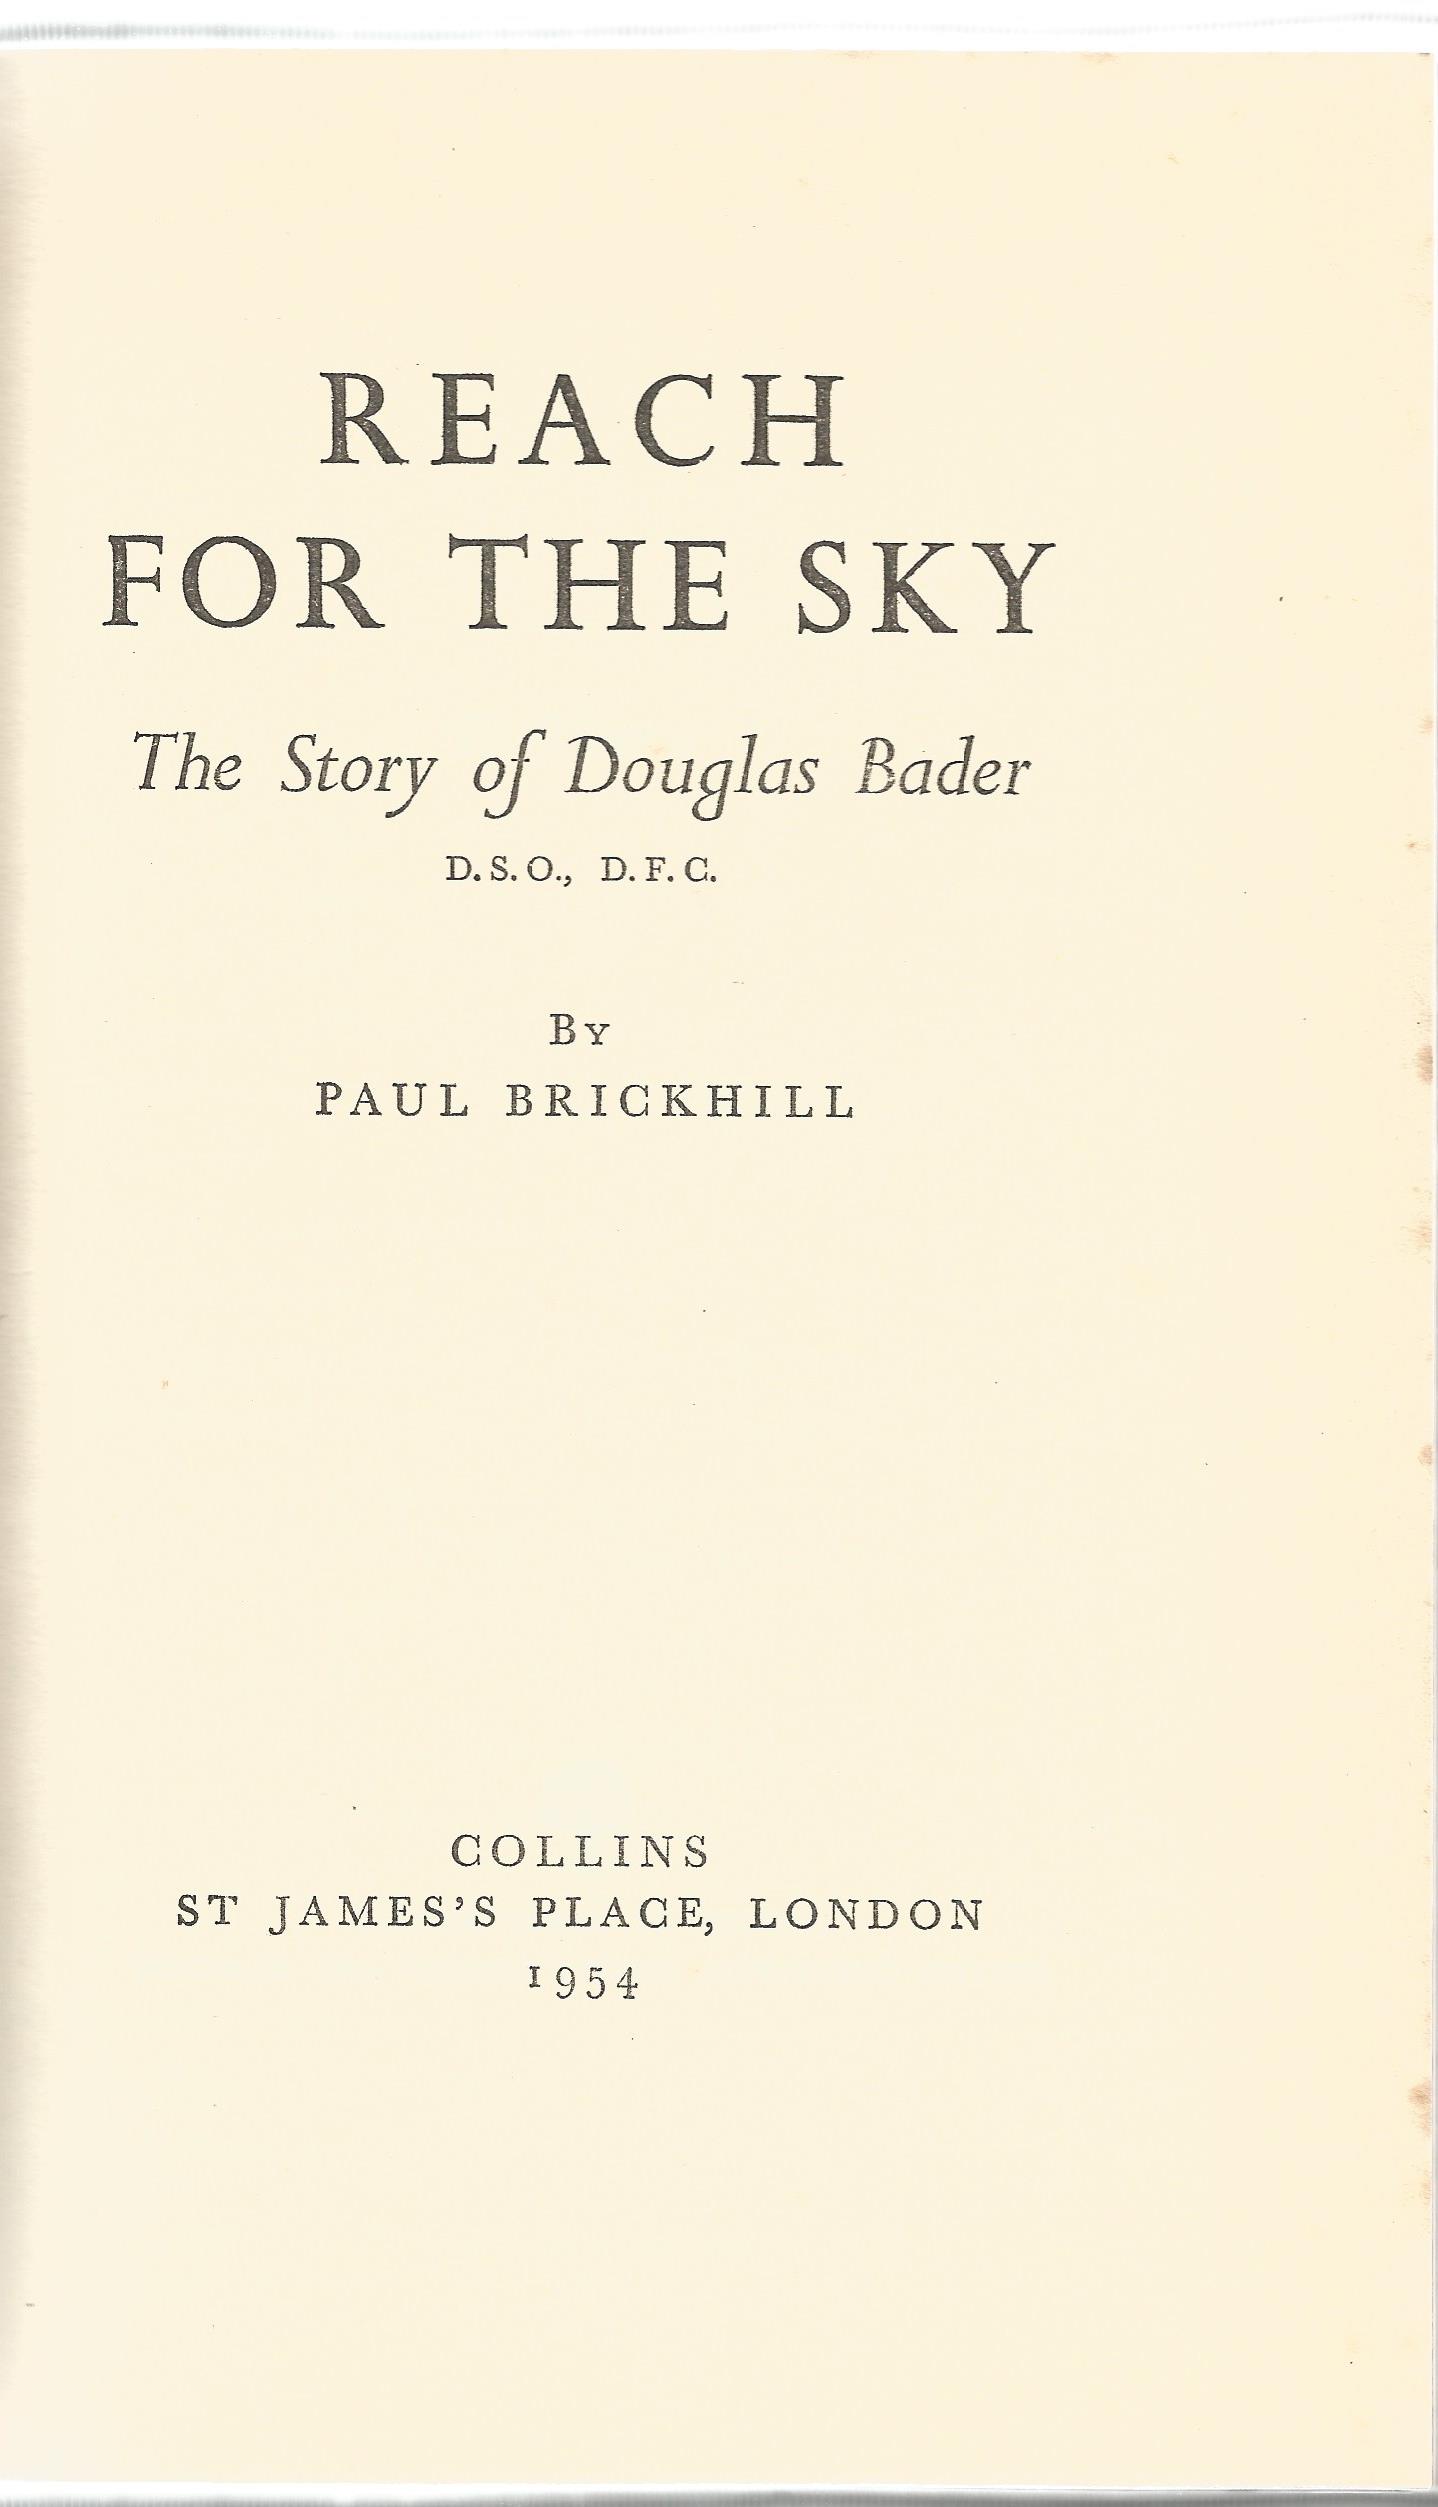 1st Edition 1954 Reach For The Sky, The Story of Douglas Bader by Paul Brickhill. Good condition